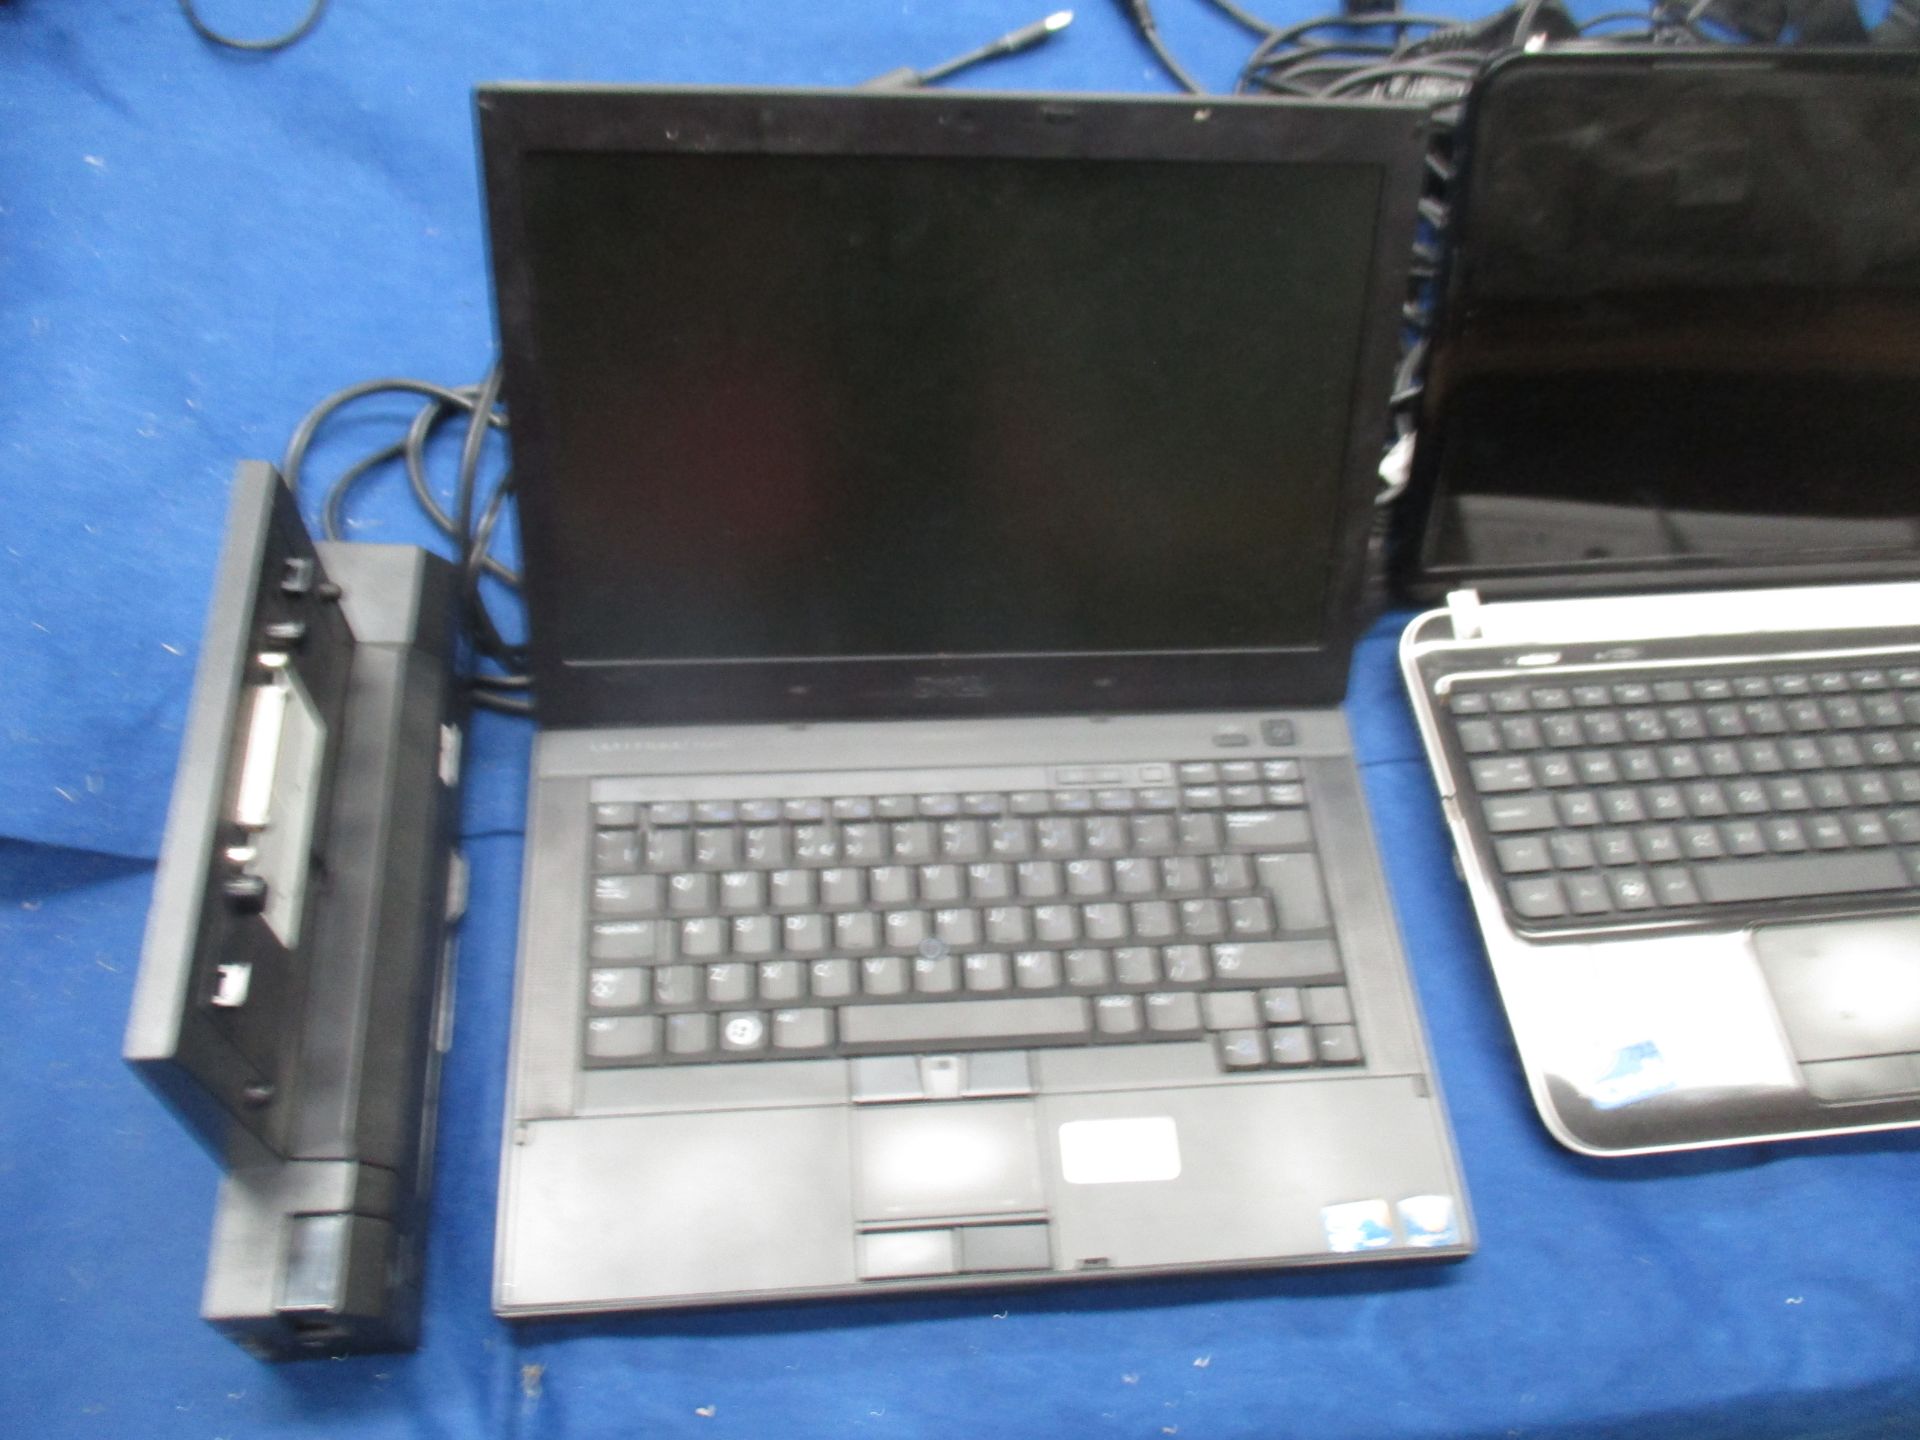 A Dell Latitude E6410 laptop computer with power lead,